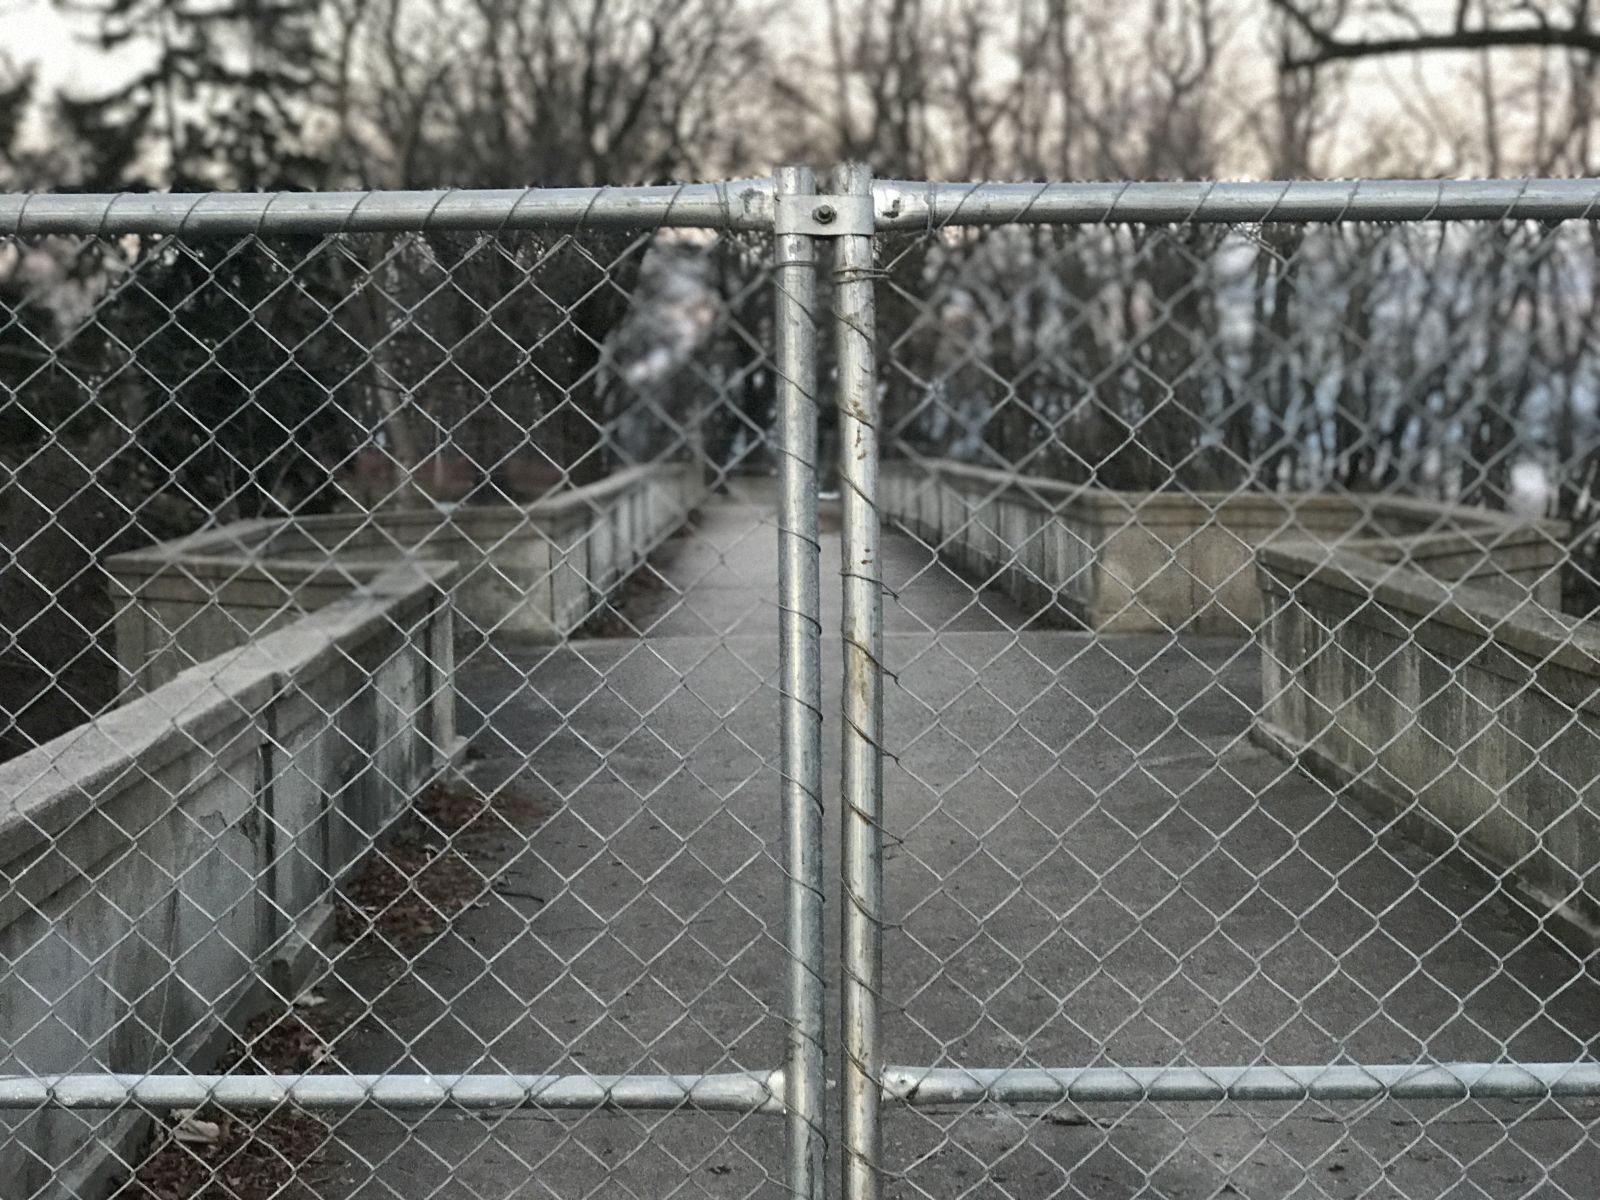 The bridge over Ravine Road was closed as of December 9th, 2016.